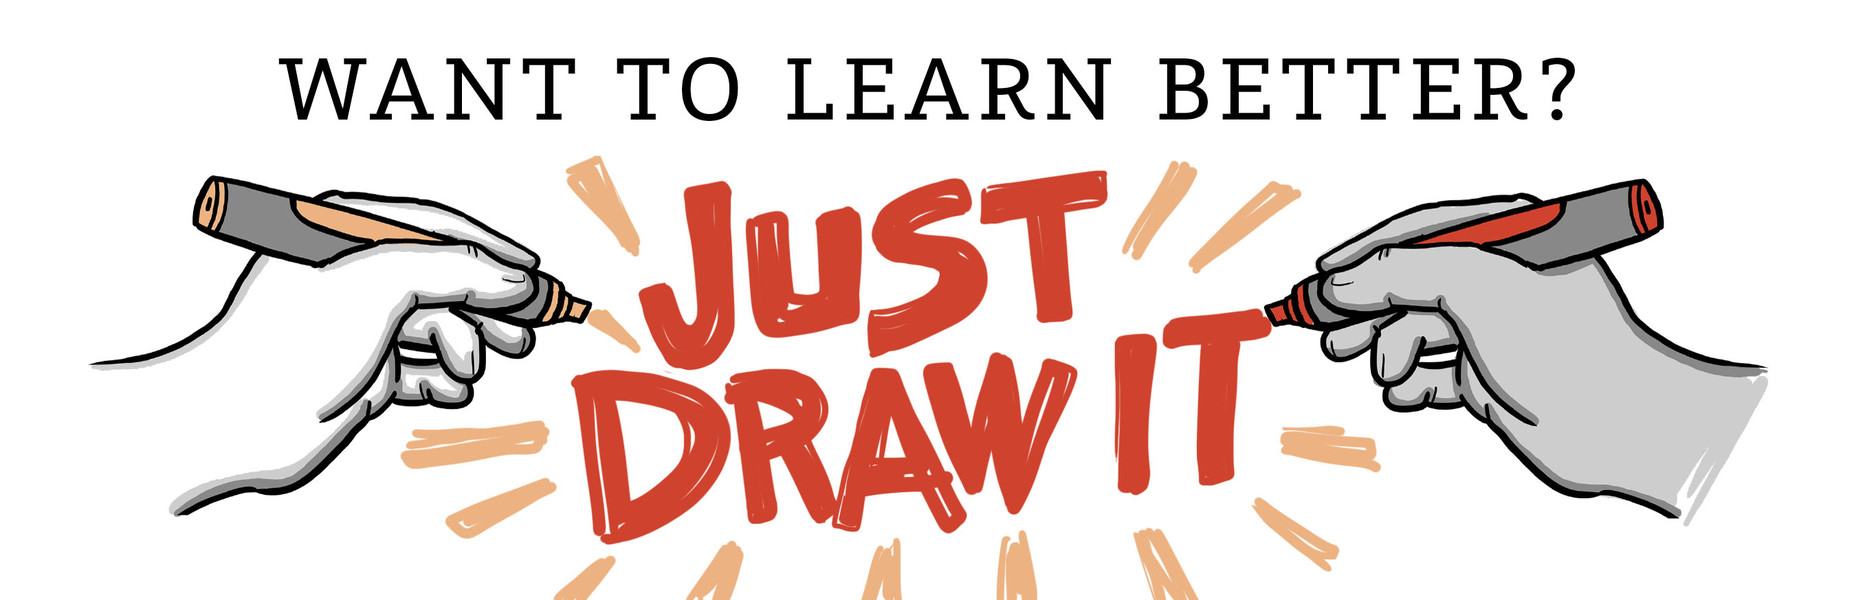 Drawing Is the Fastest, Most Effective Way to Learn, According to